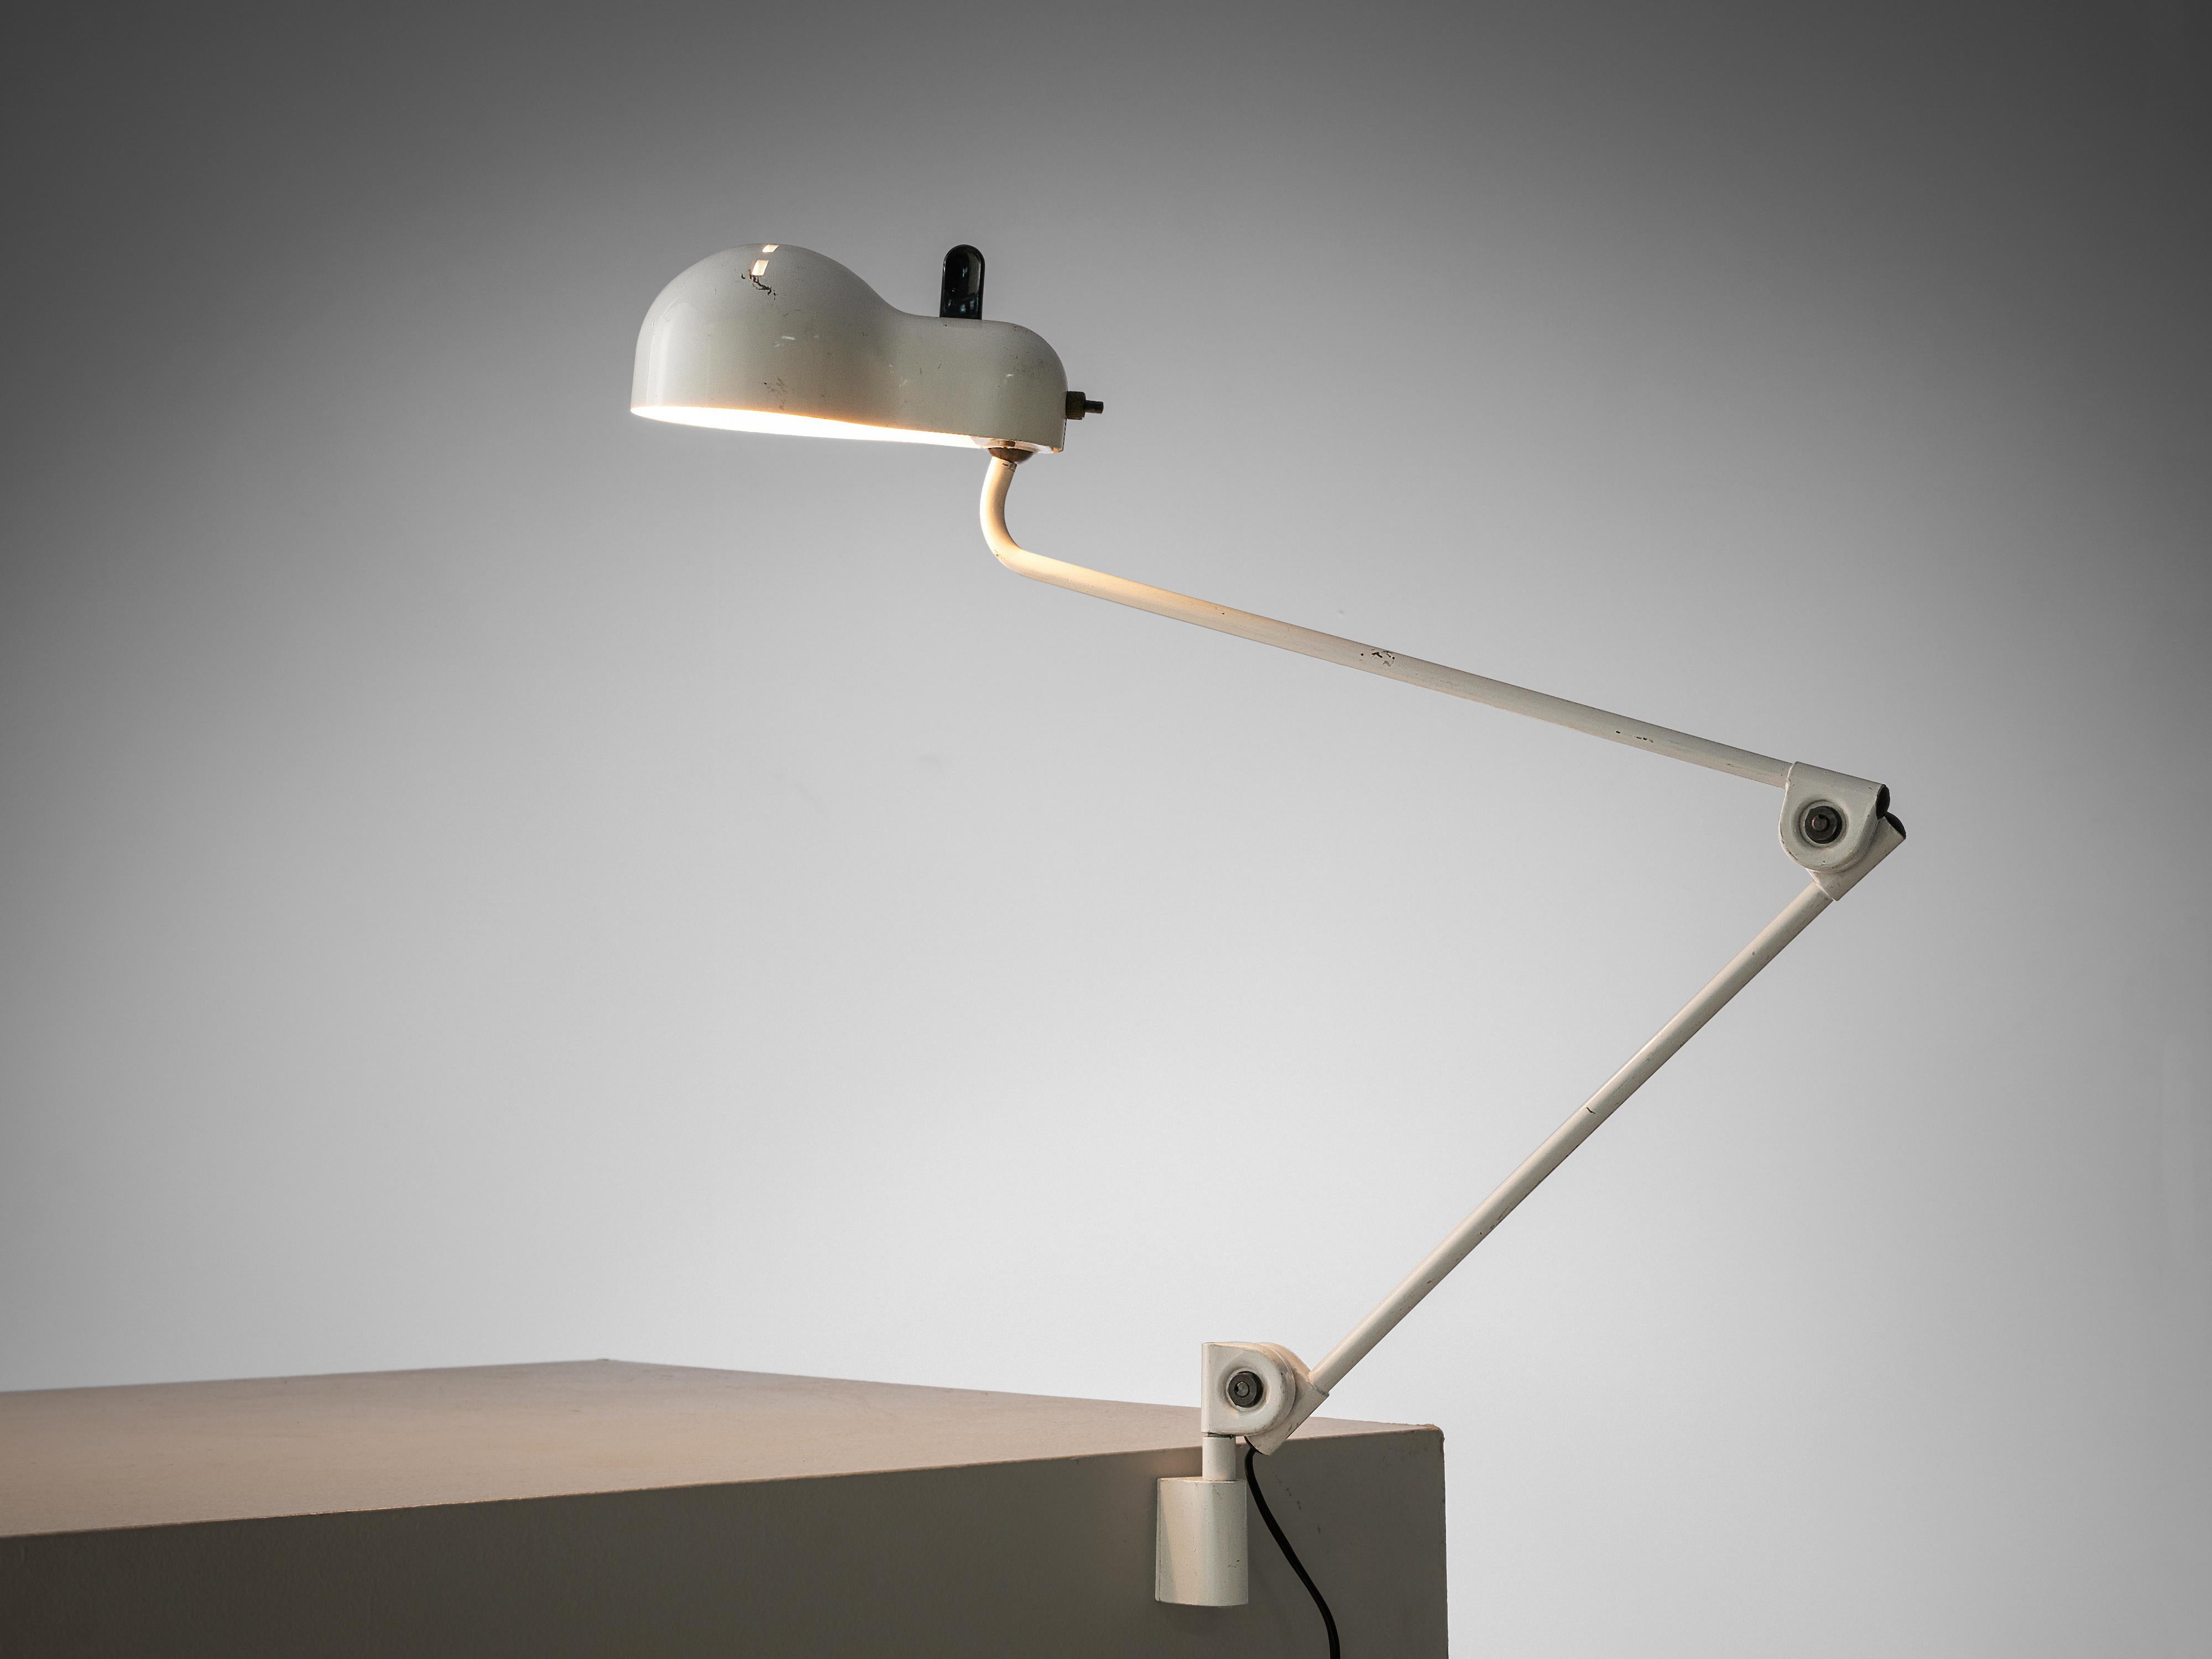 Joe Colombo for Stilnovo, 'Topo' desk lamp, metal, Italy, 1960s

The 'Topo' desk light is a design of the Joe Colombo and manufactured in Italy by Stilnovo during the 1970s. The piece in white lacquered metal features a metal shade mounted on a